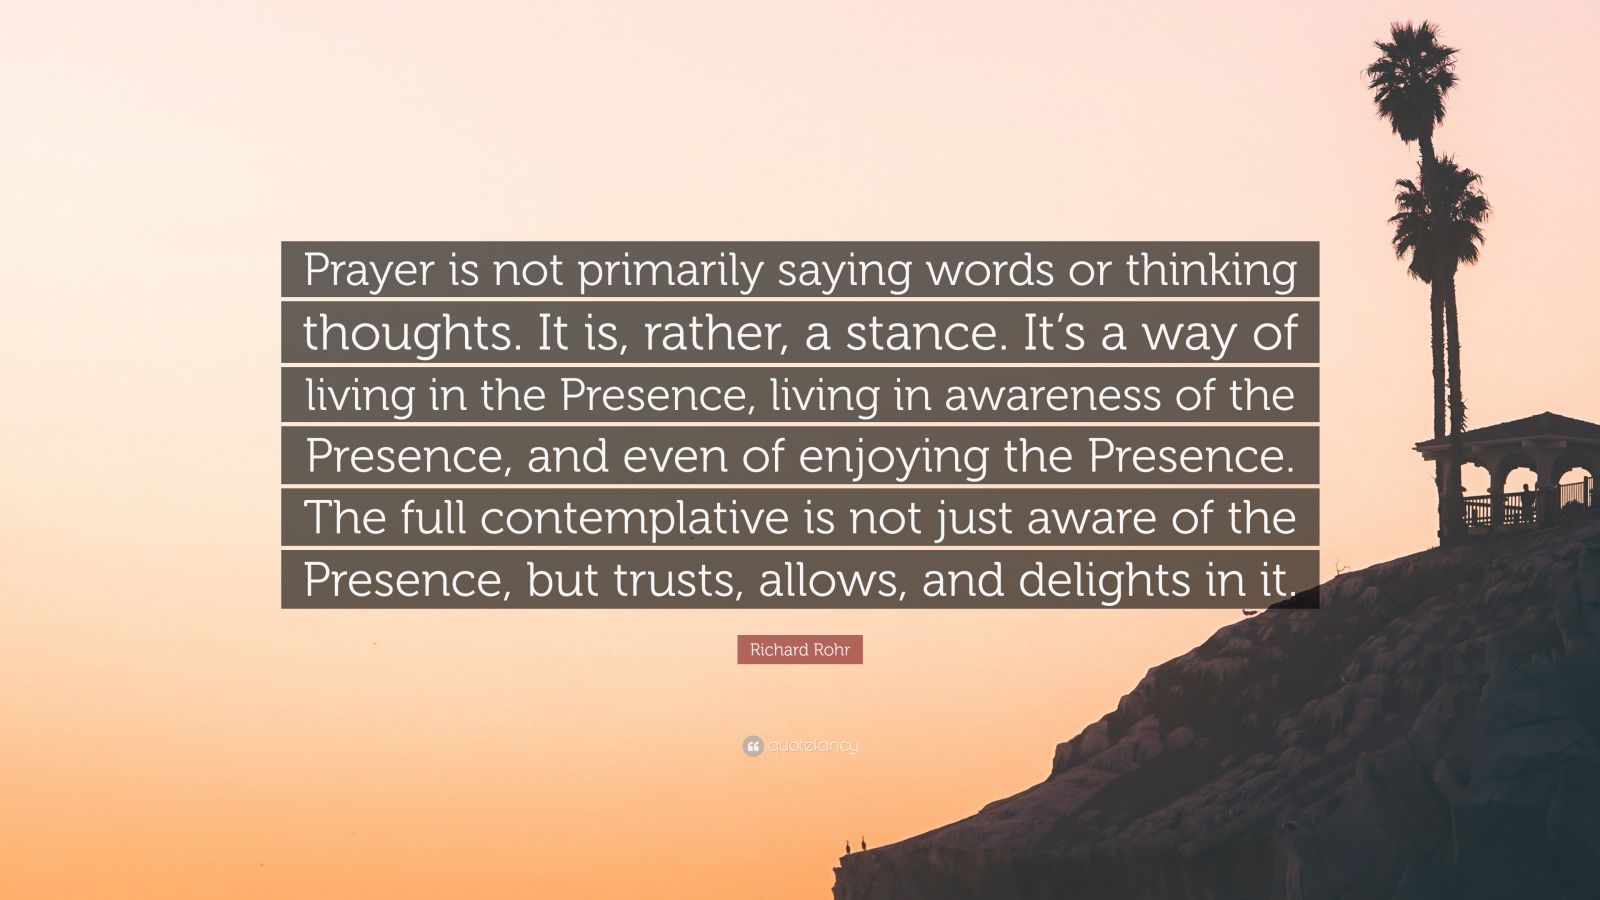 Richard Rohr Quote: “Prayer is not primarily saying words or thinking ...